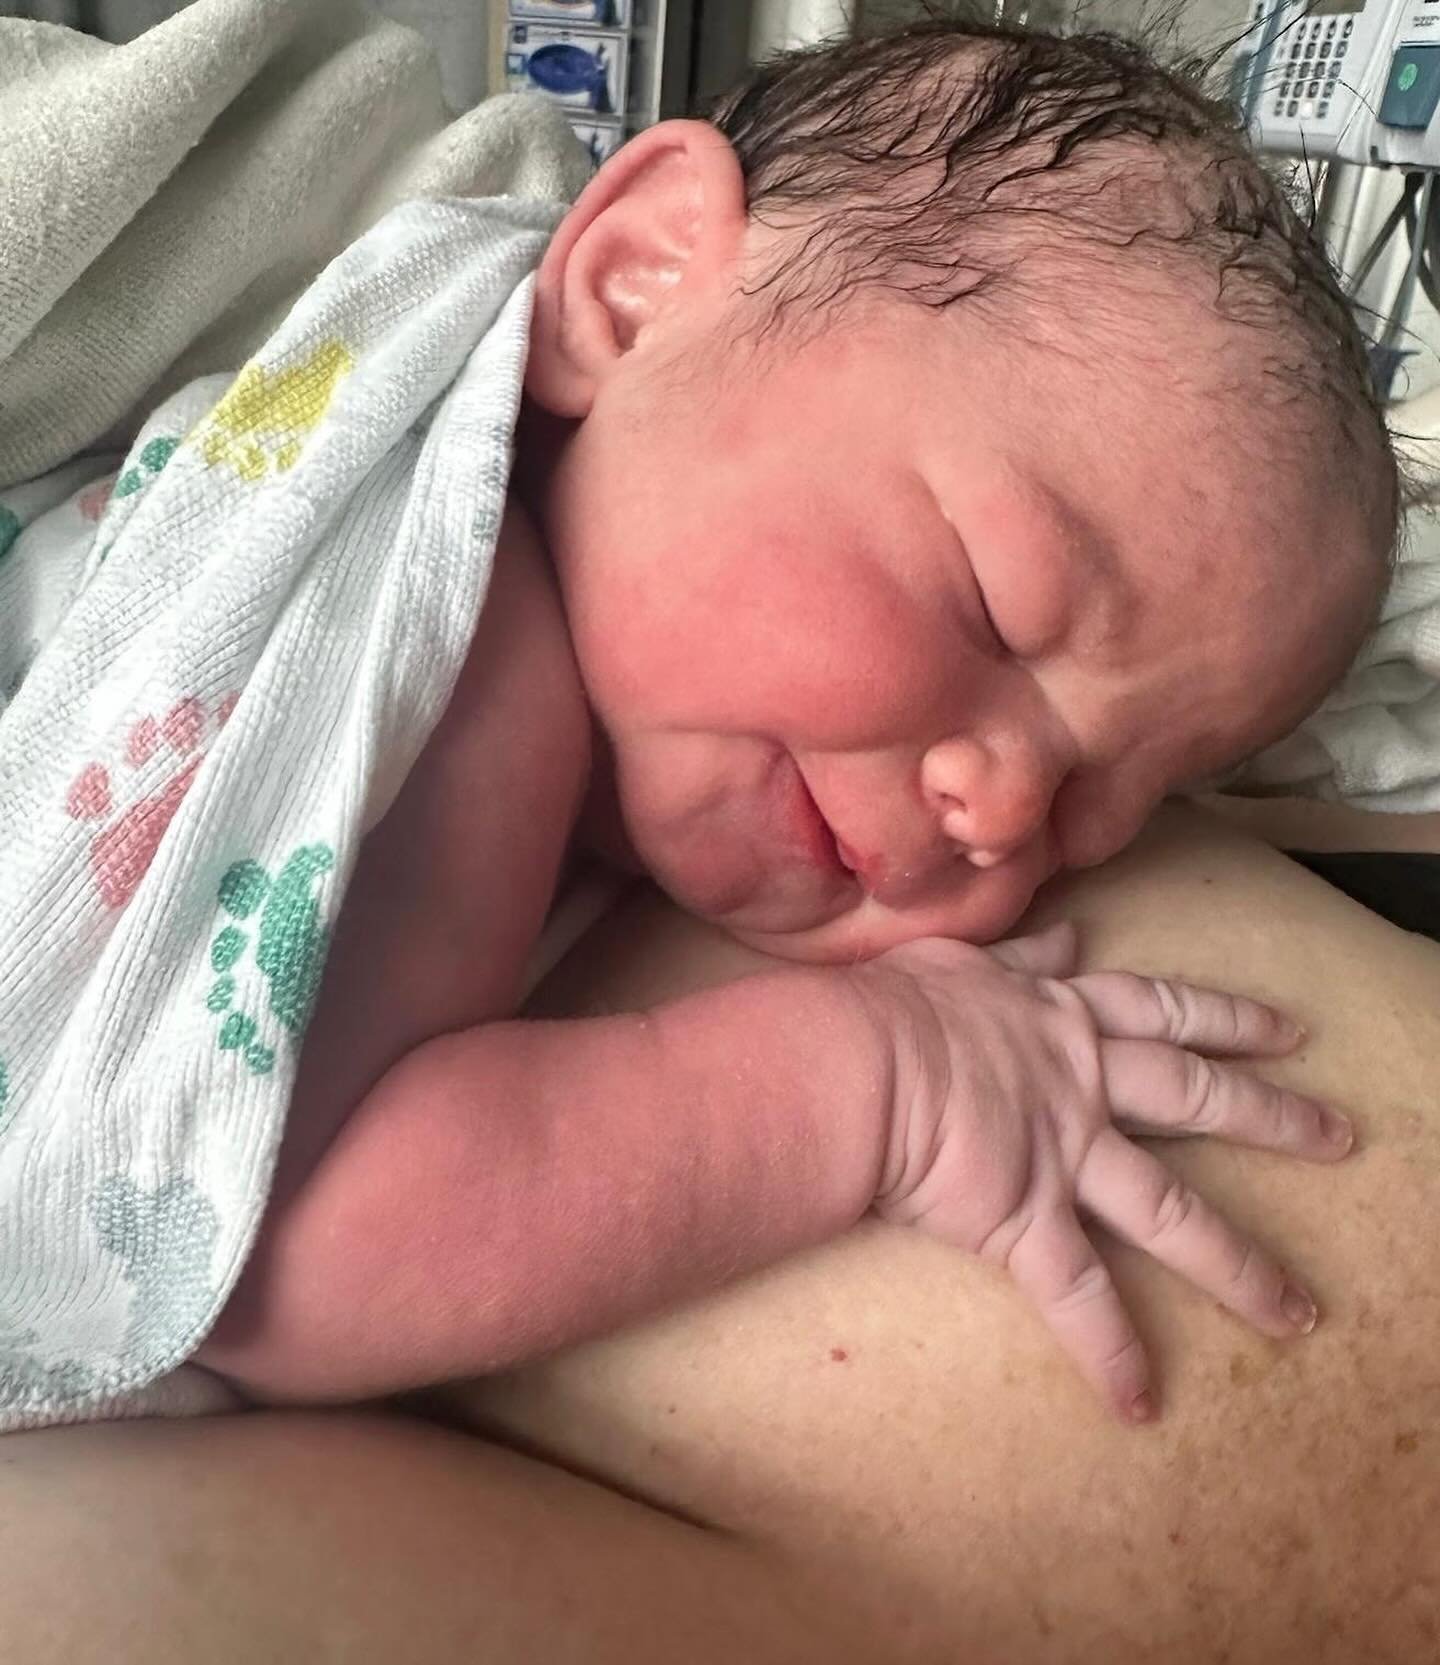 Please join us in welcoming baby Hope! Hope was born a couple of weeks ago at Legacy Emanuel. Her mom was in our care for her prenatal journey, and she developed some complications in her pregnancy that made her birth significantly more high-risk, so